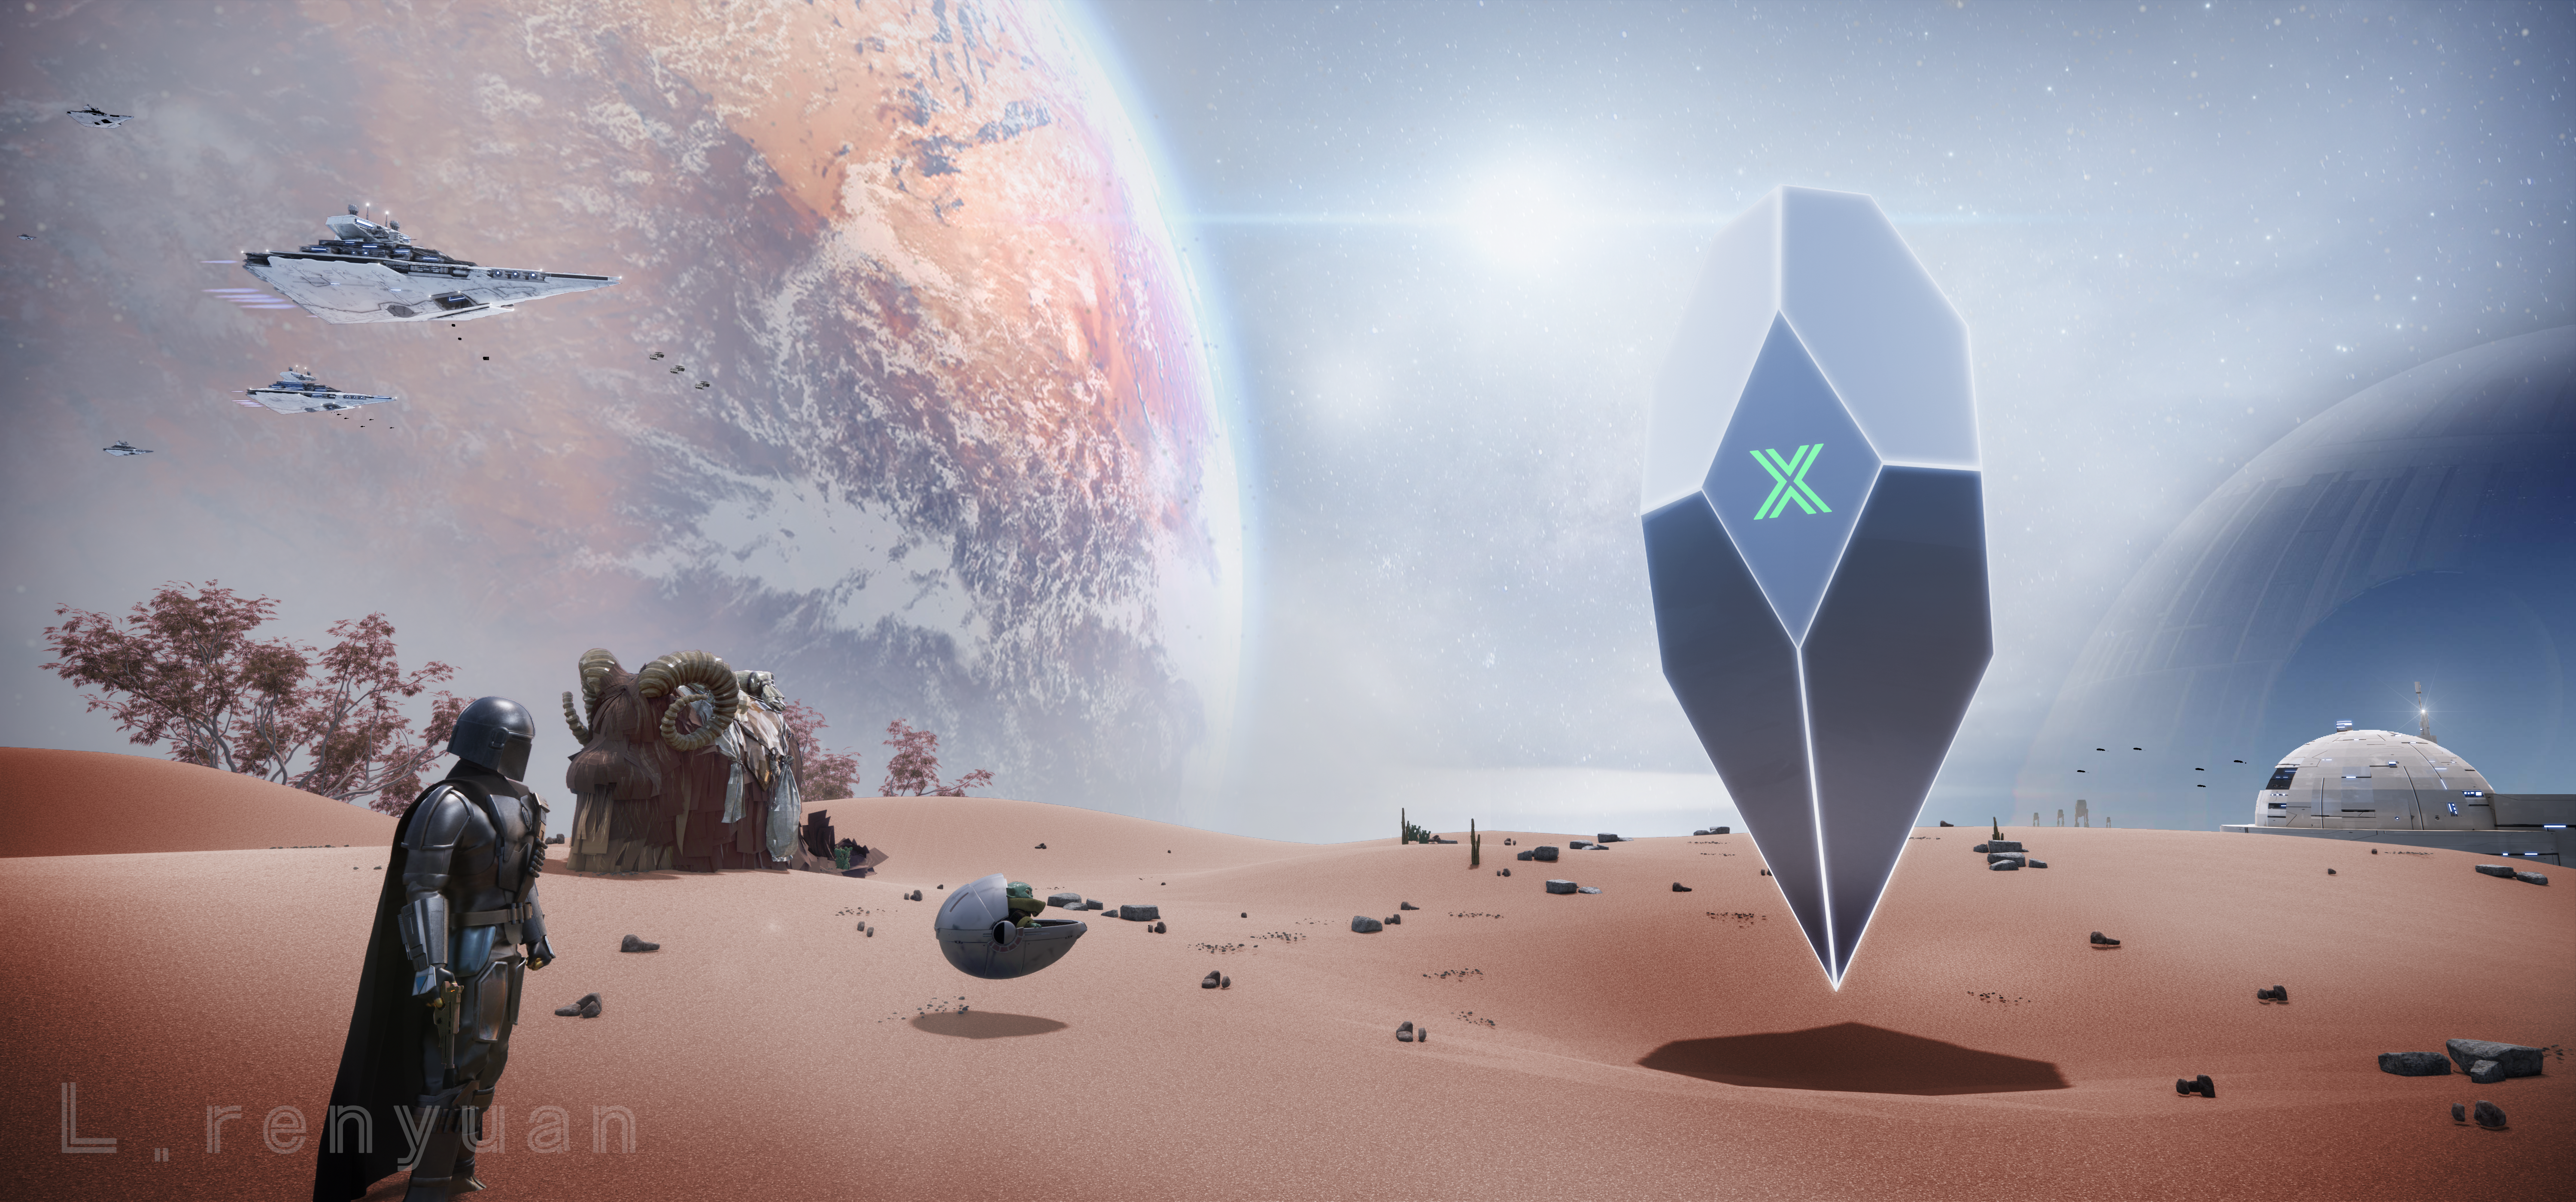 Star Academy Science Fiction Space Adventure 6000x2800